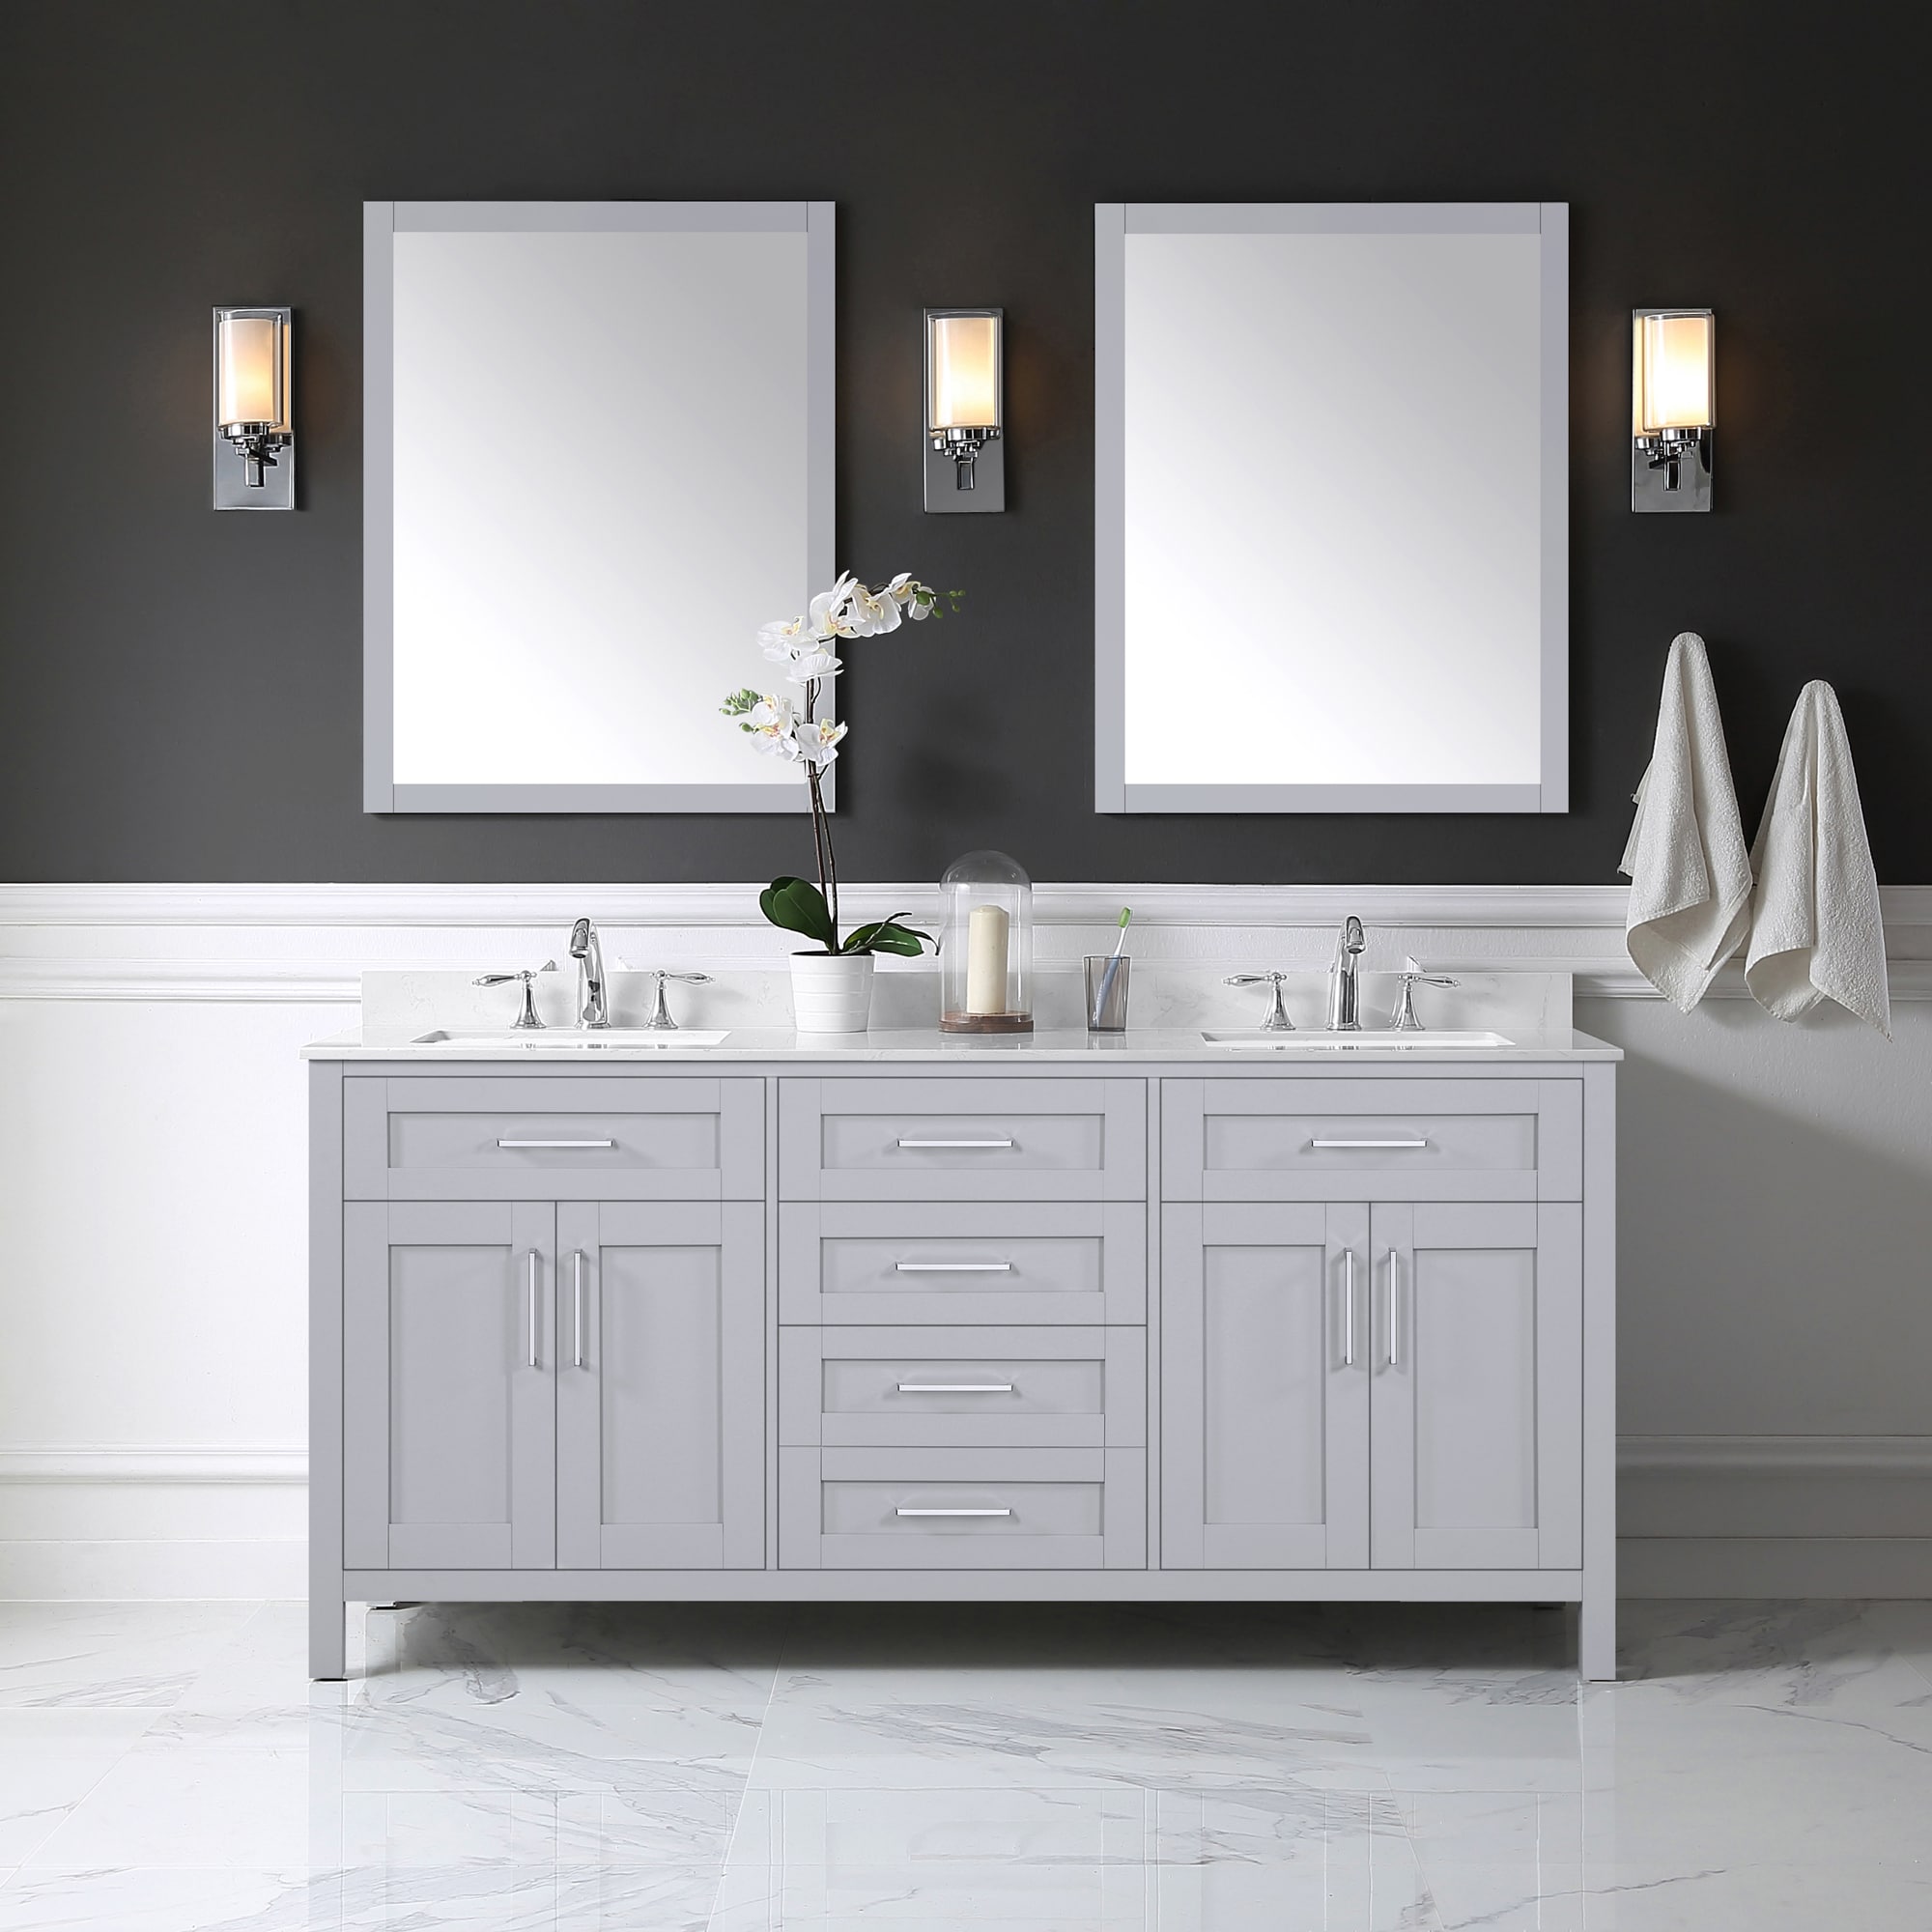 Ove Decors Tahoe 72 In Dove Gray, What Size Mirrors For A 72 Double Vanity